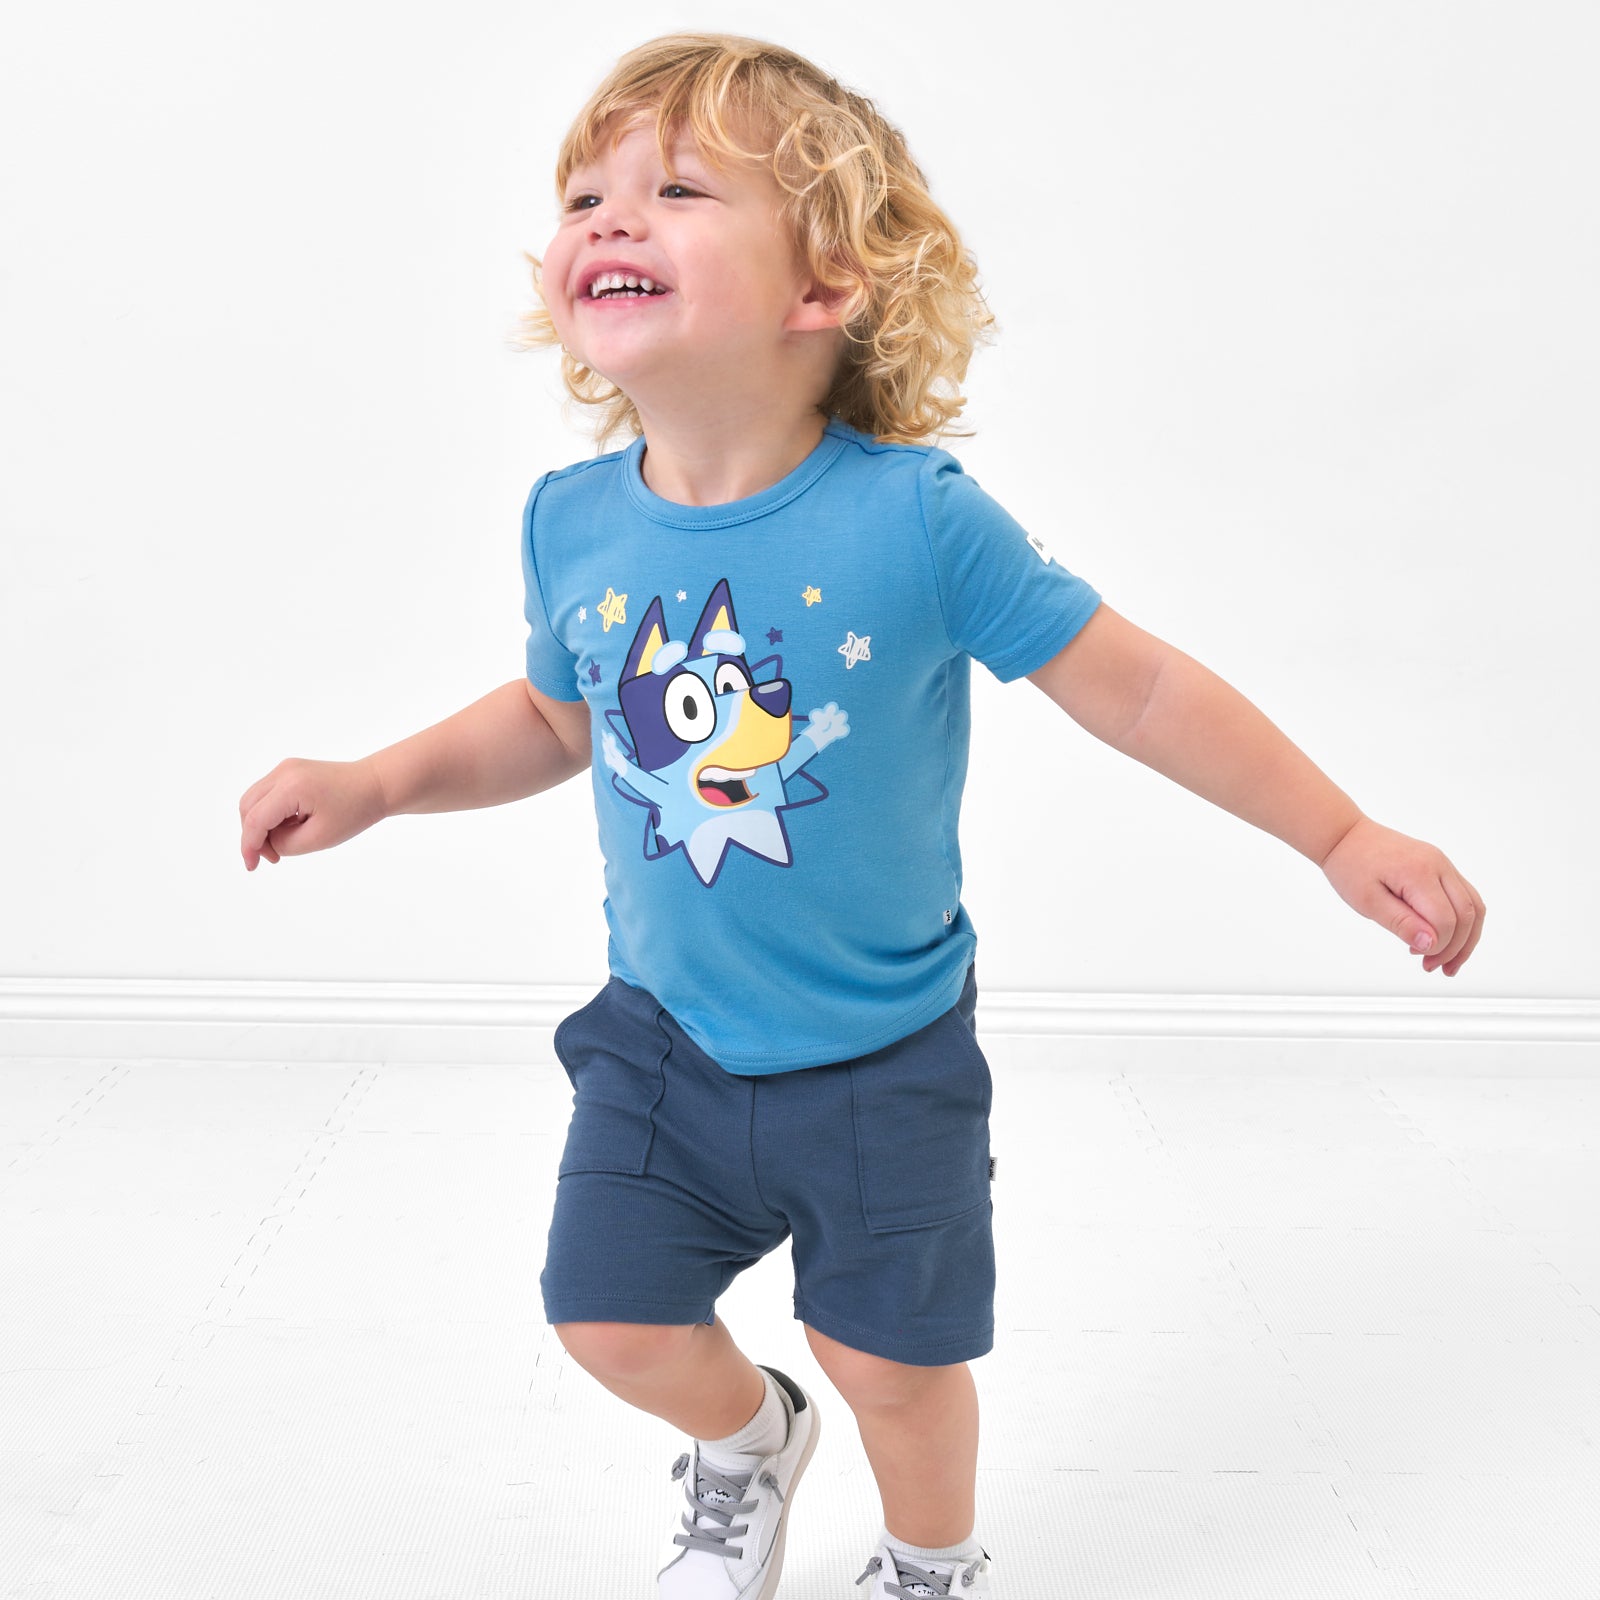 Child running wearing a Bluey graphic tee and coordinating shorts